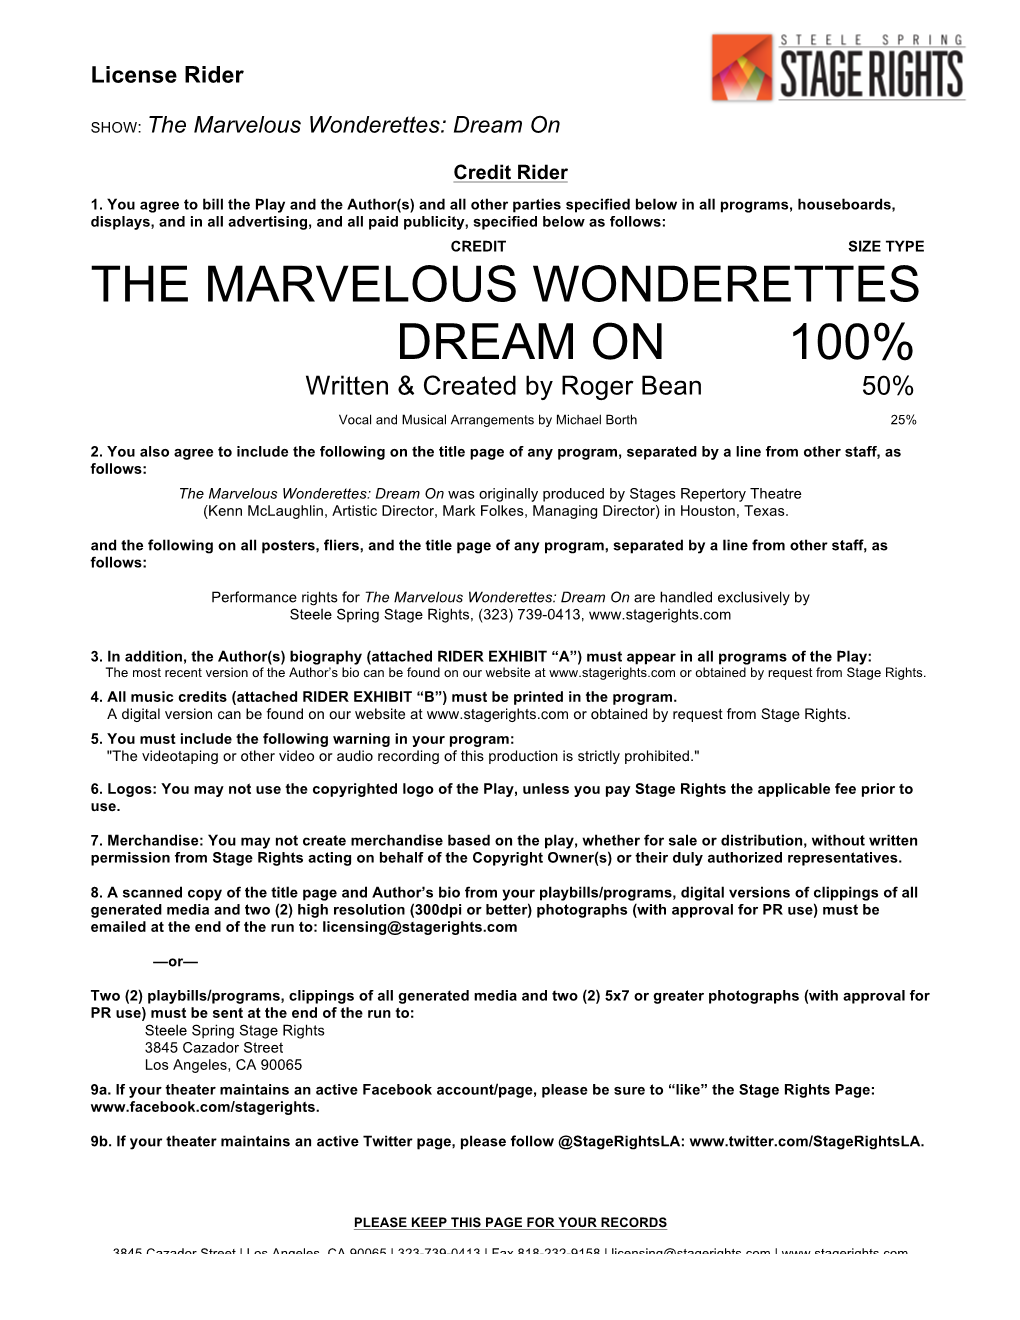 THE MARVELOUS WONDERETTES DREAM on 100% Written & Created by Roger Bean 50%